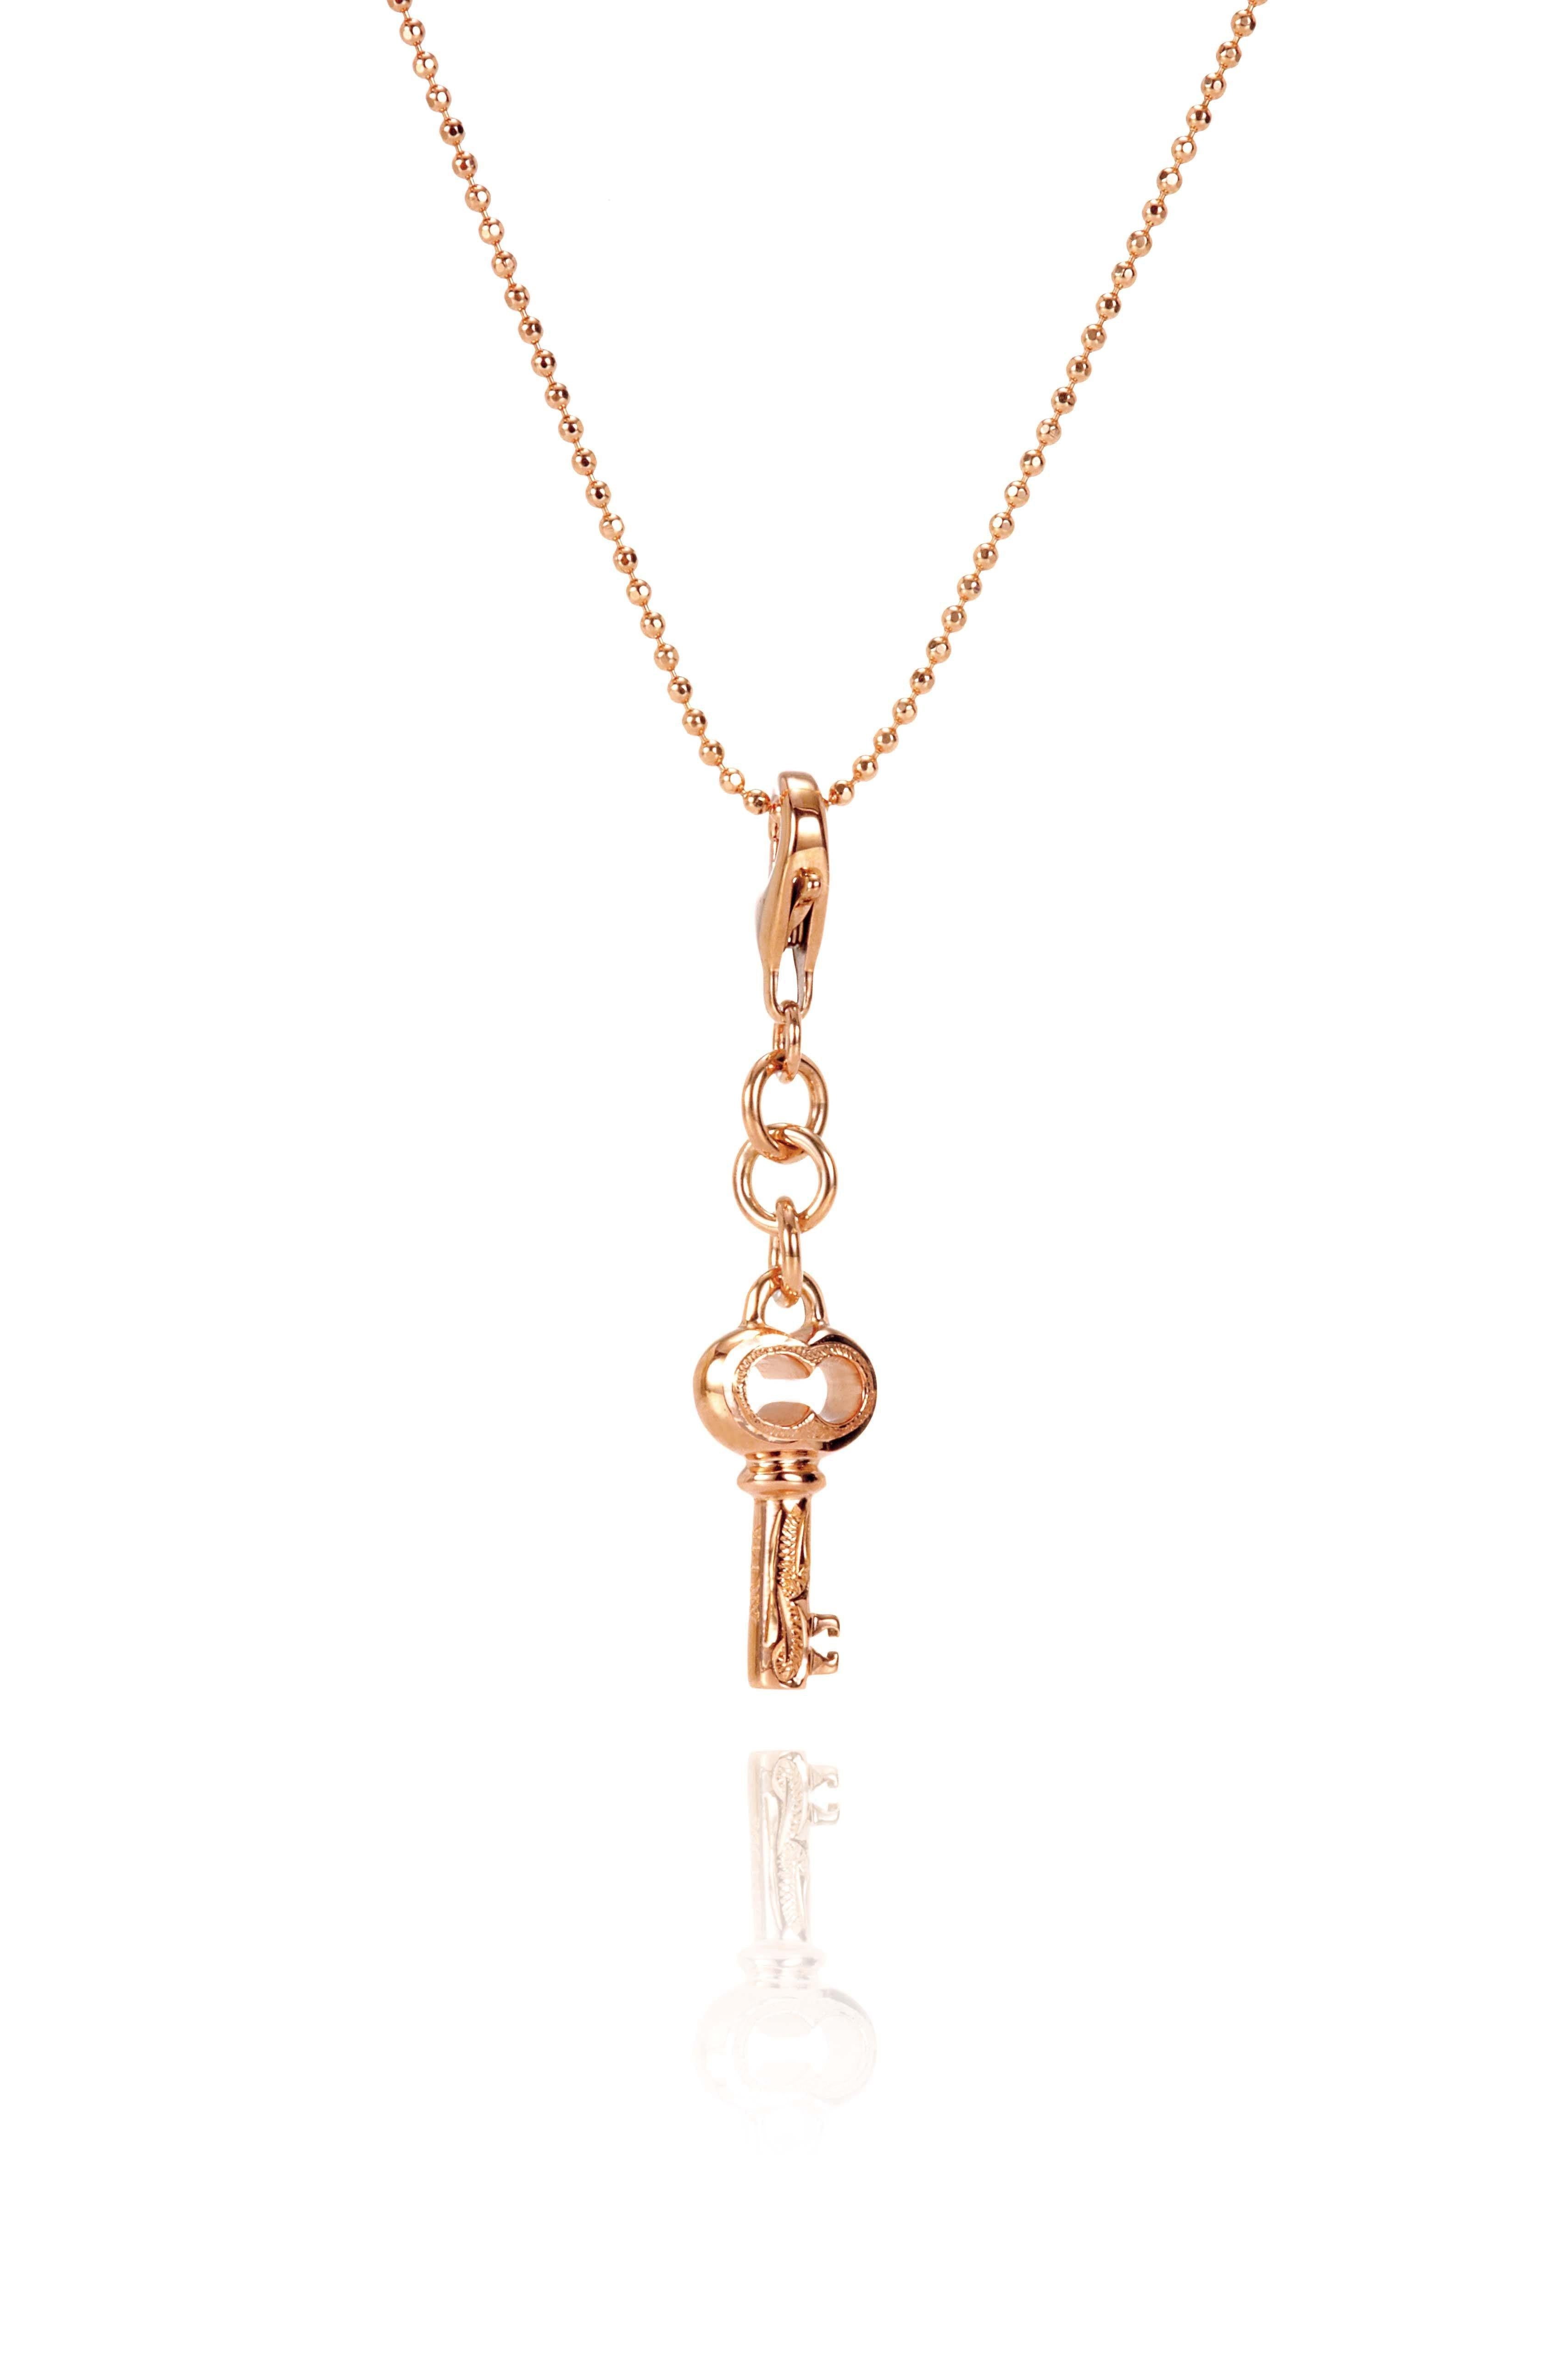 The picture shows a 14K yellow gold key charm with hand-engraved detailing.